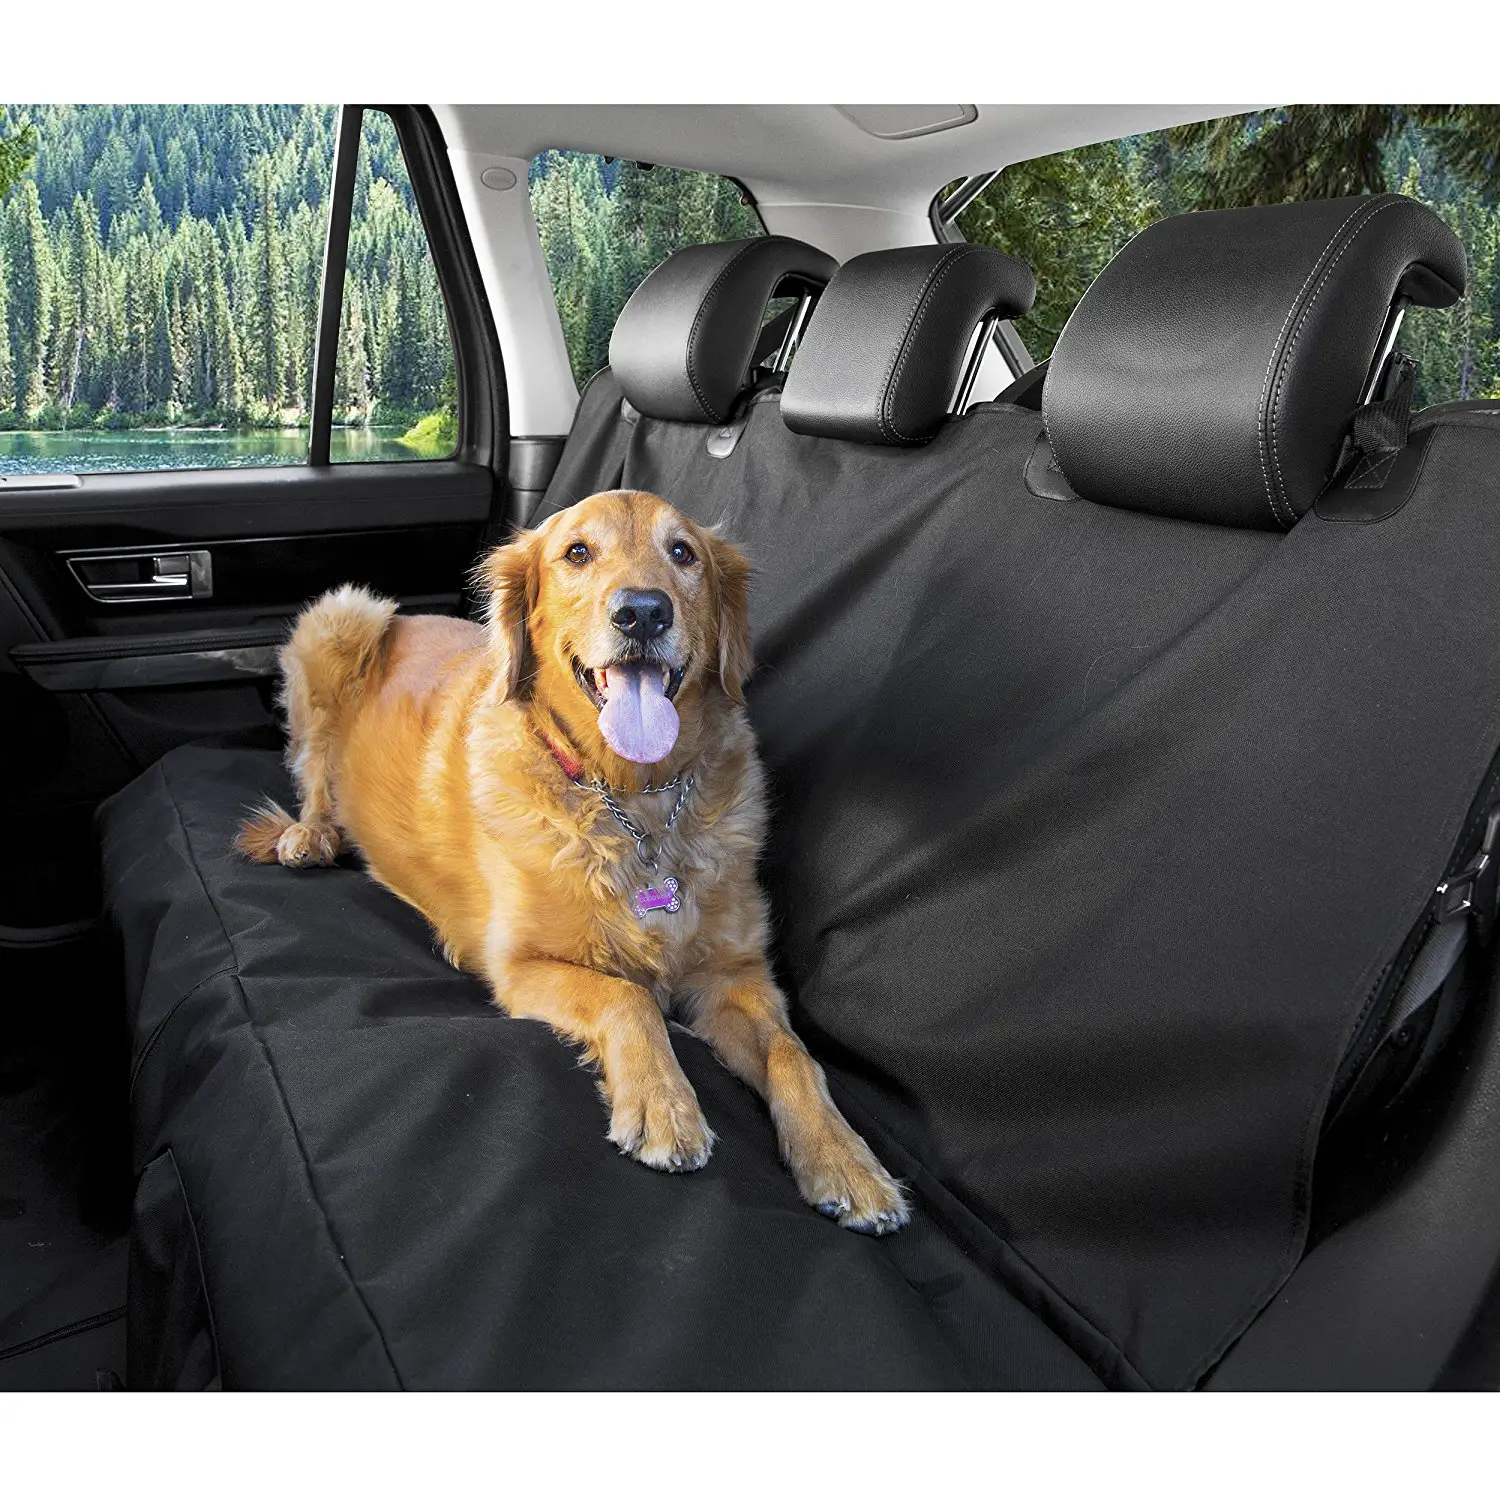 An in depth review of the best dog car seat covers in 2018